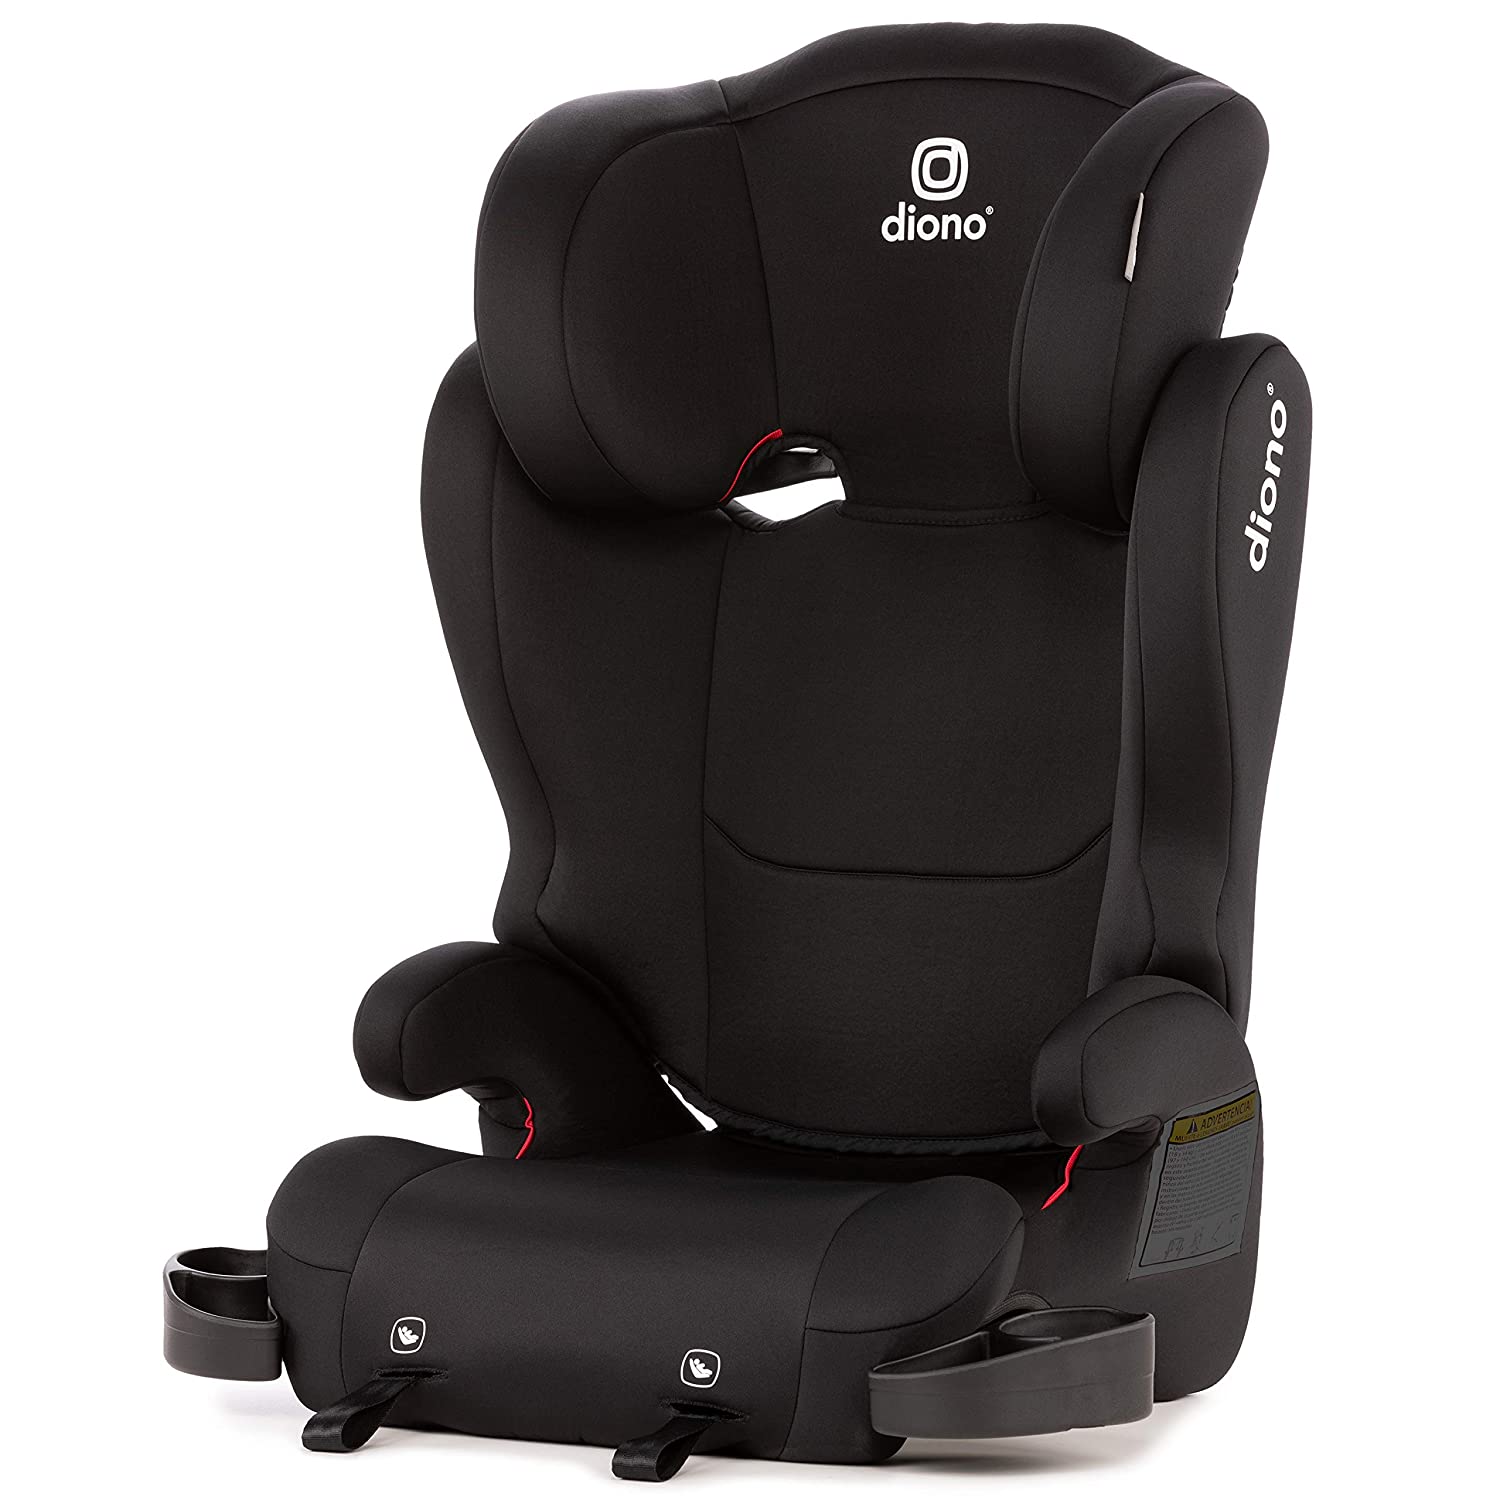 Diono Recalls Cambria 2 Booster Seats for Injury Risk